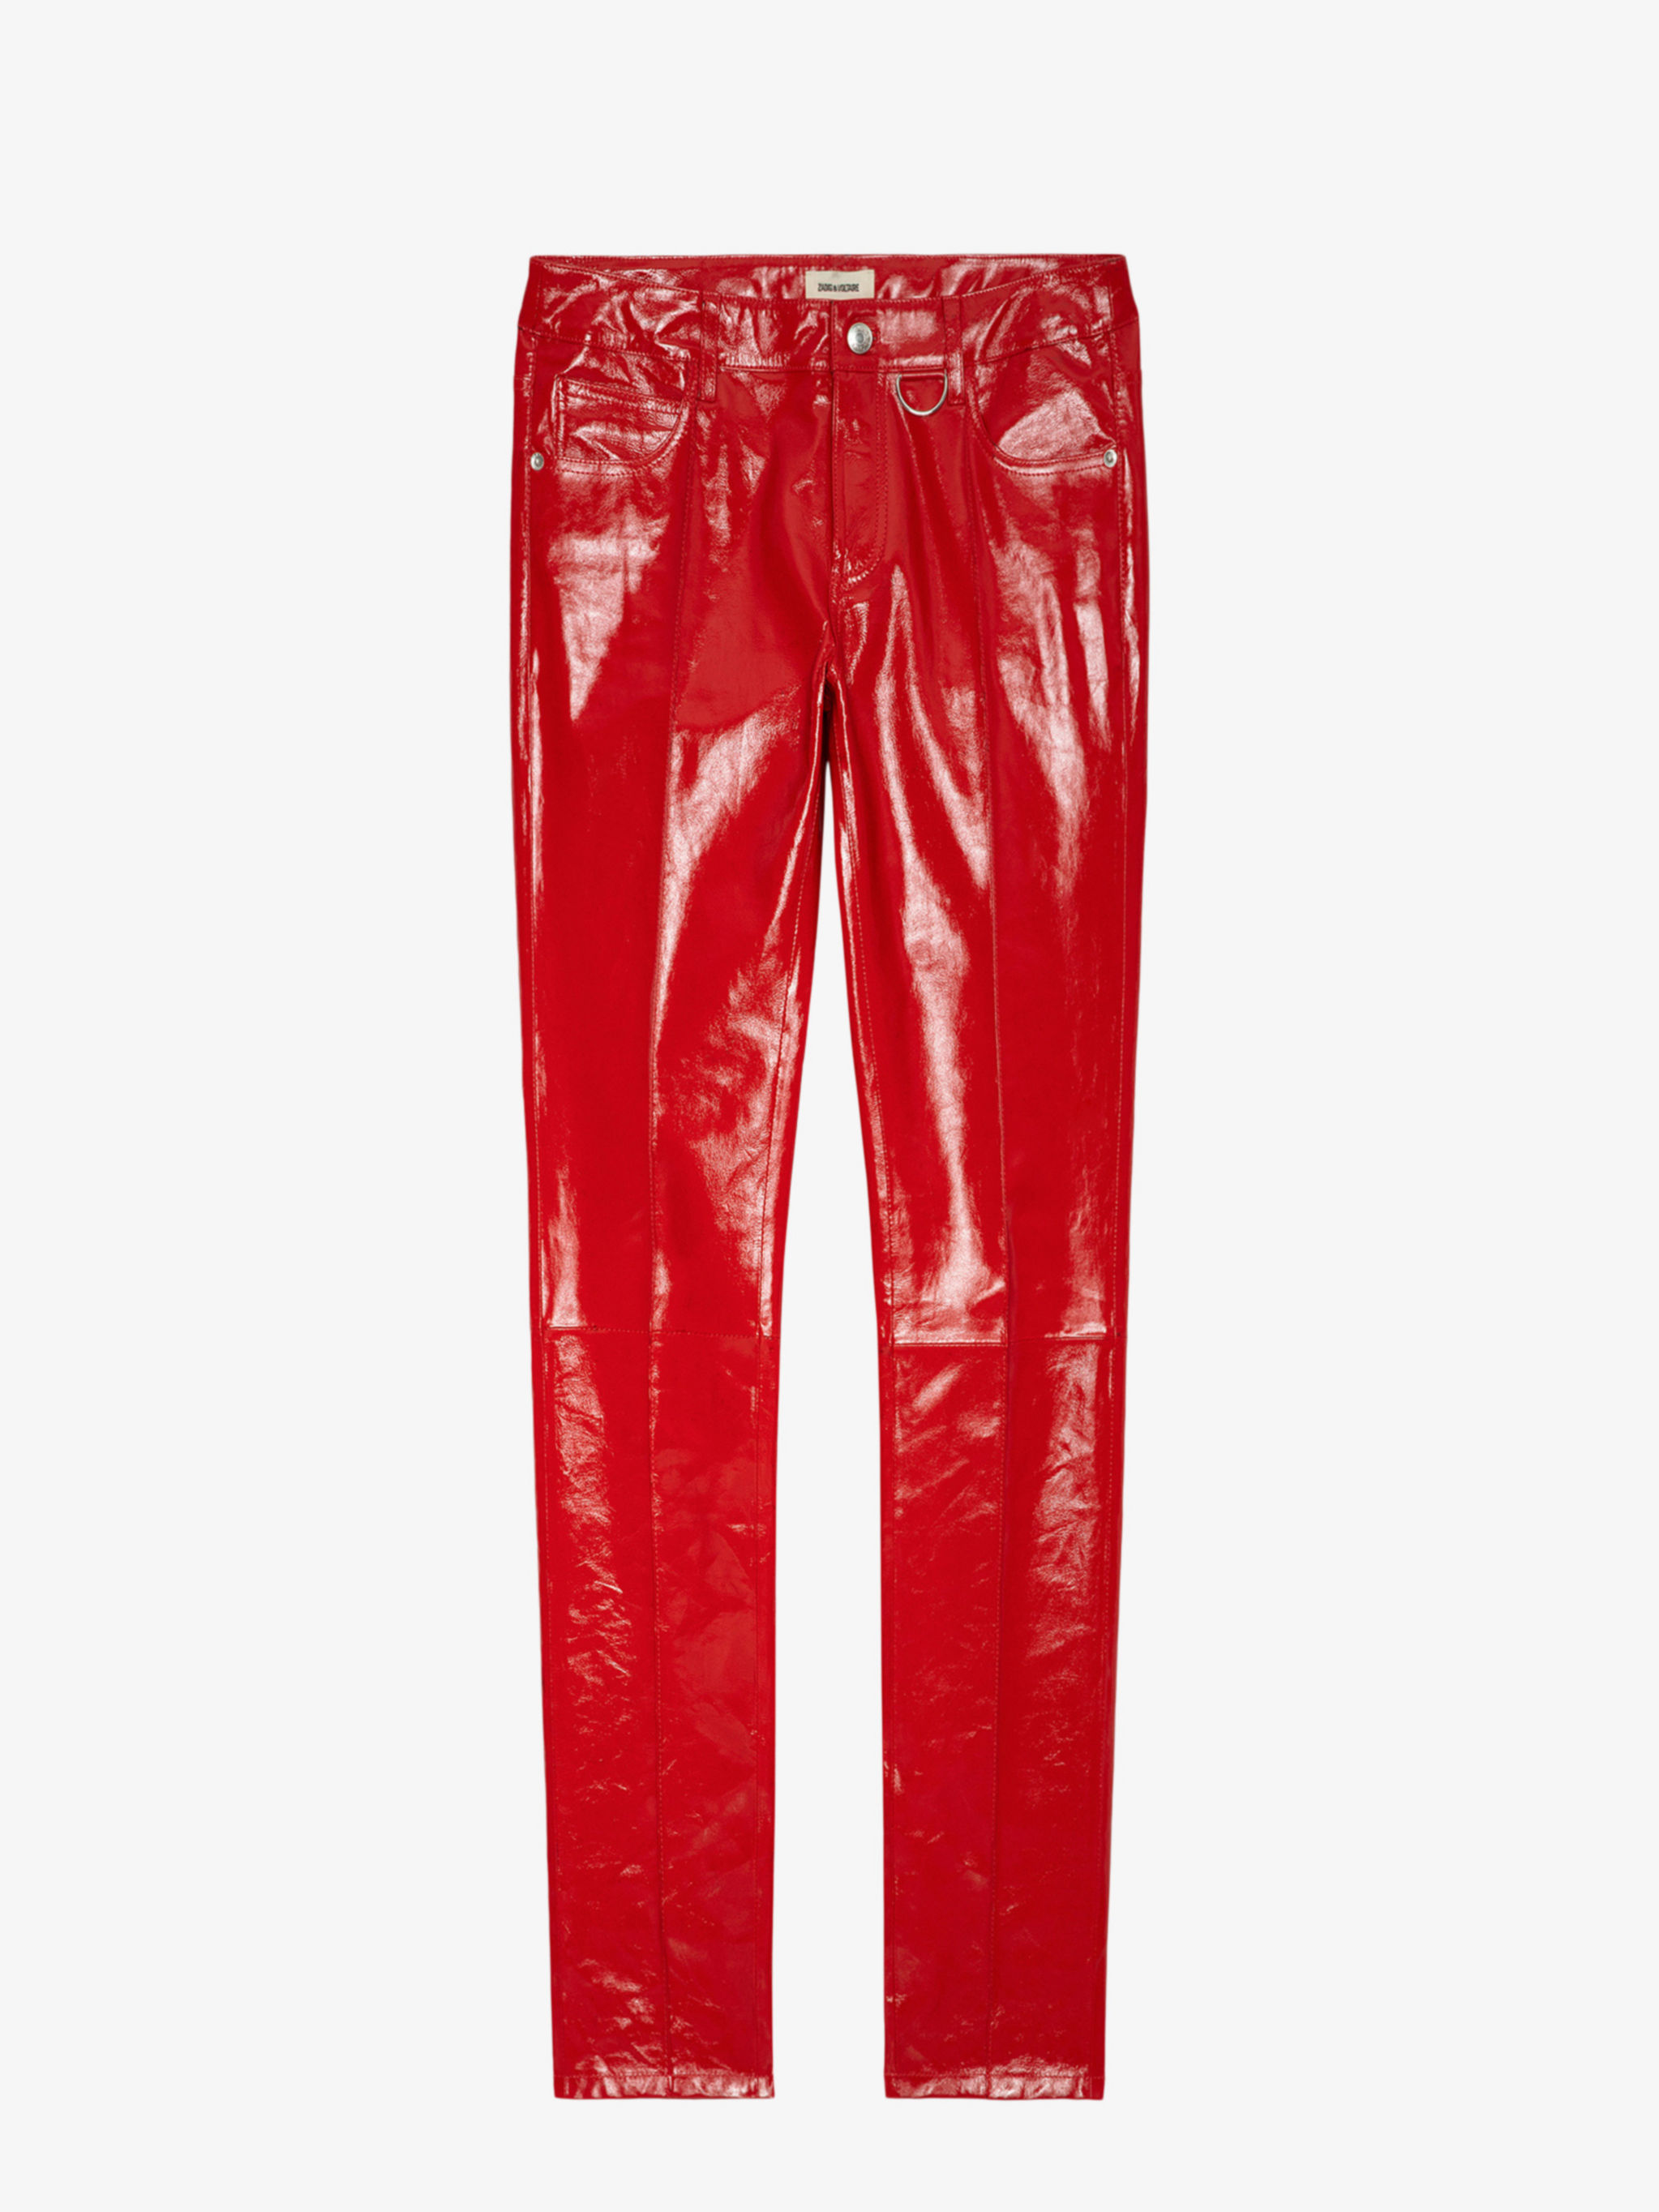 Zadig & Voltaire + Peko Slim-Fit Leather Trousers in Japon